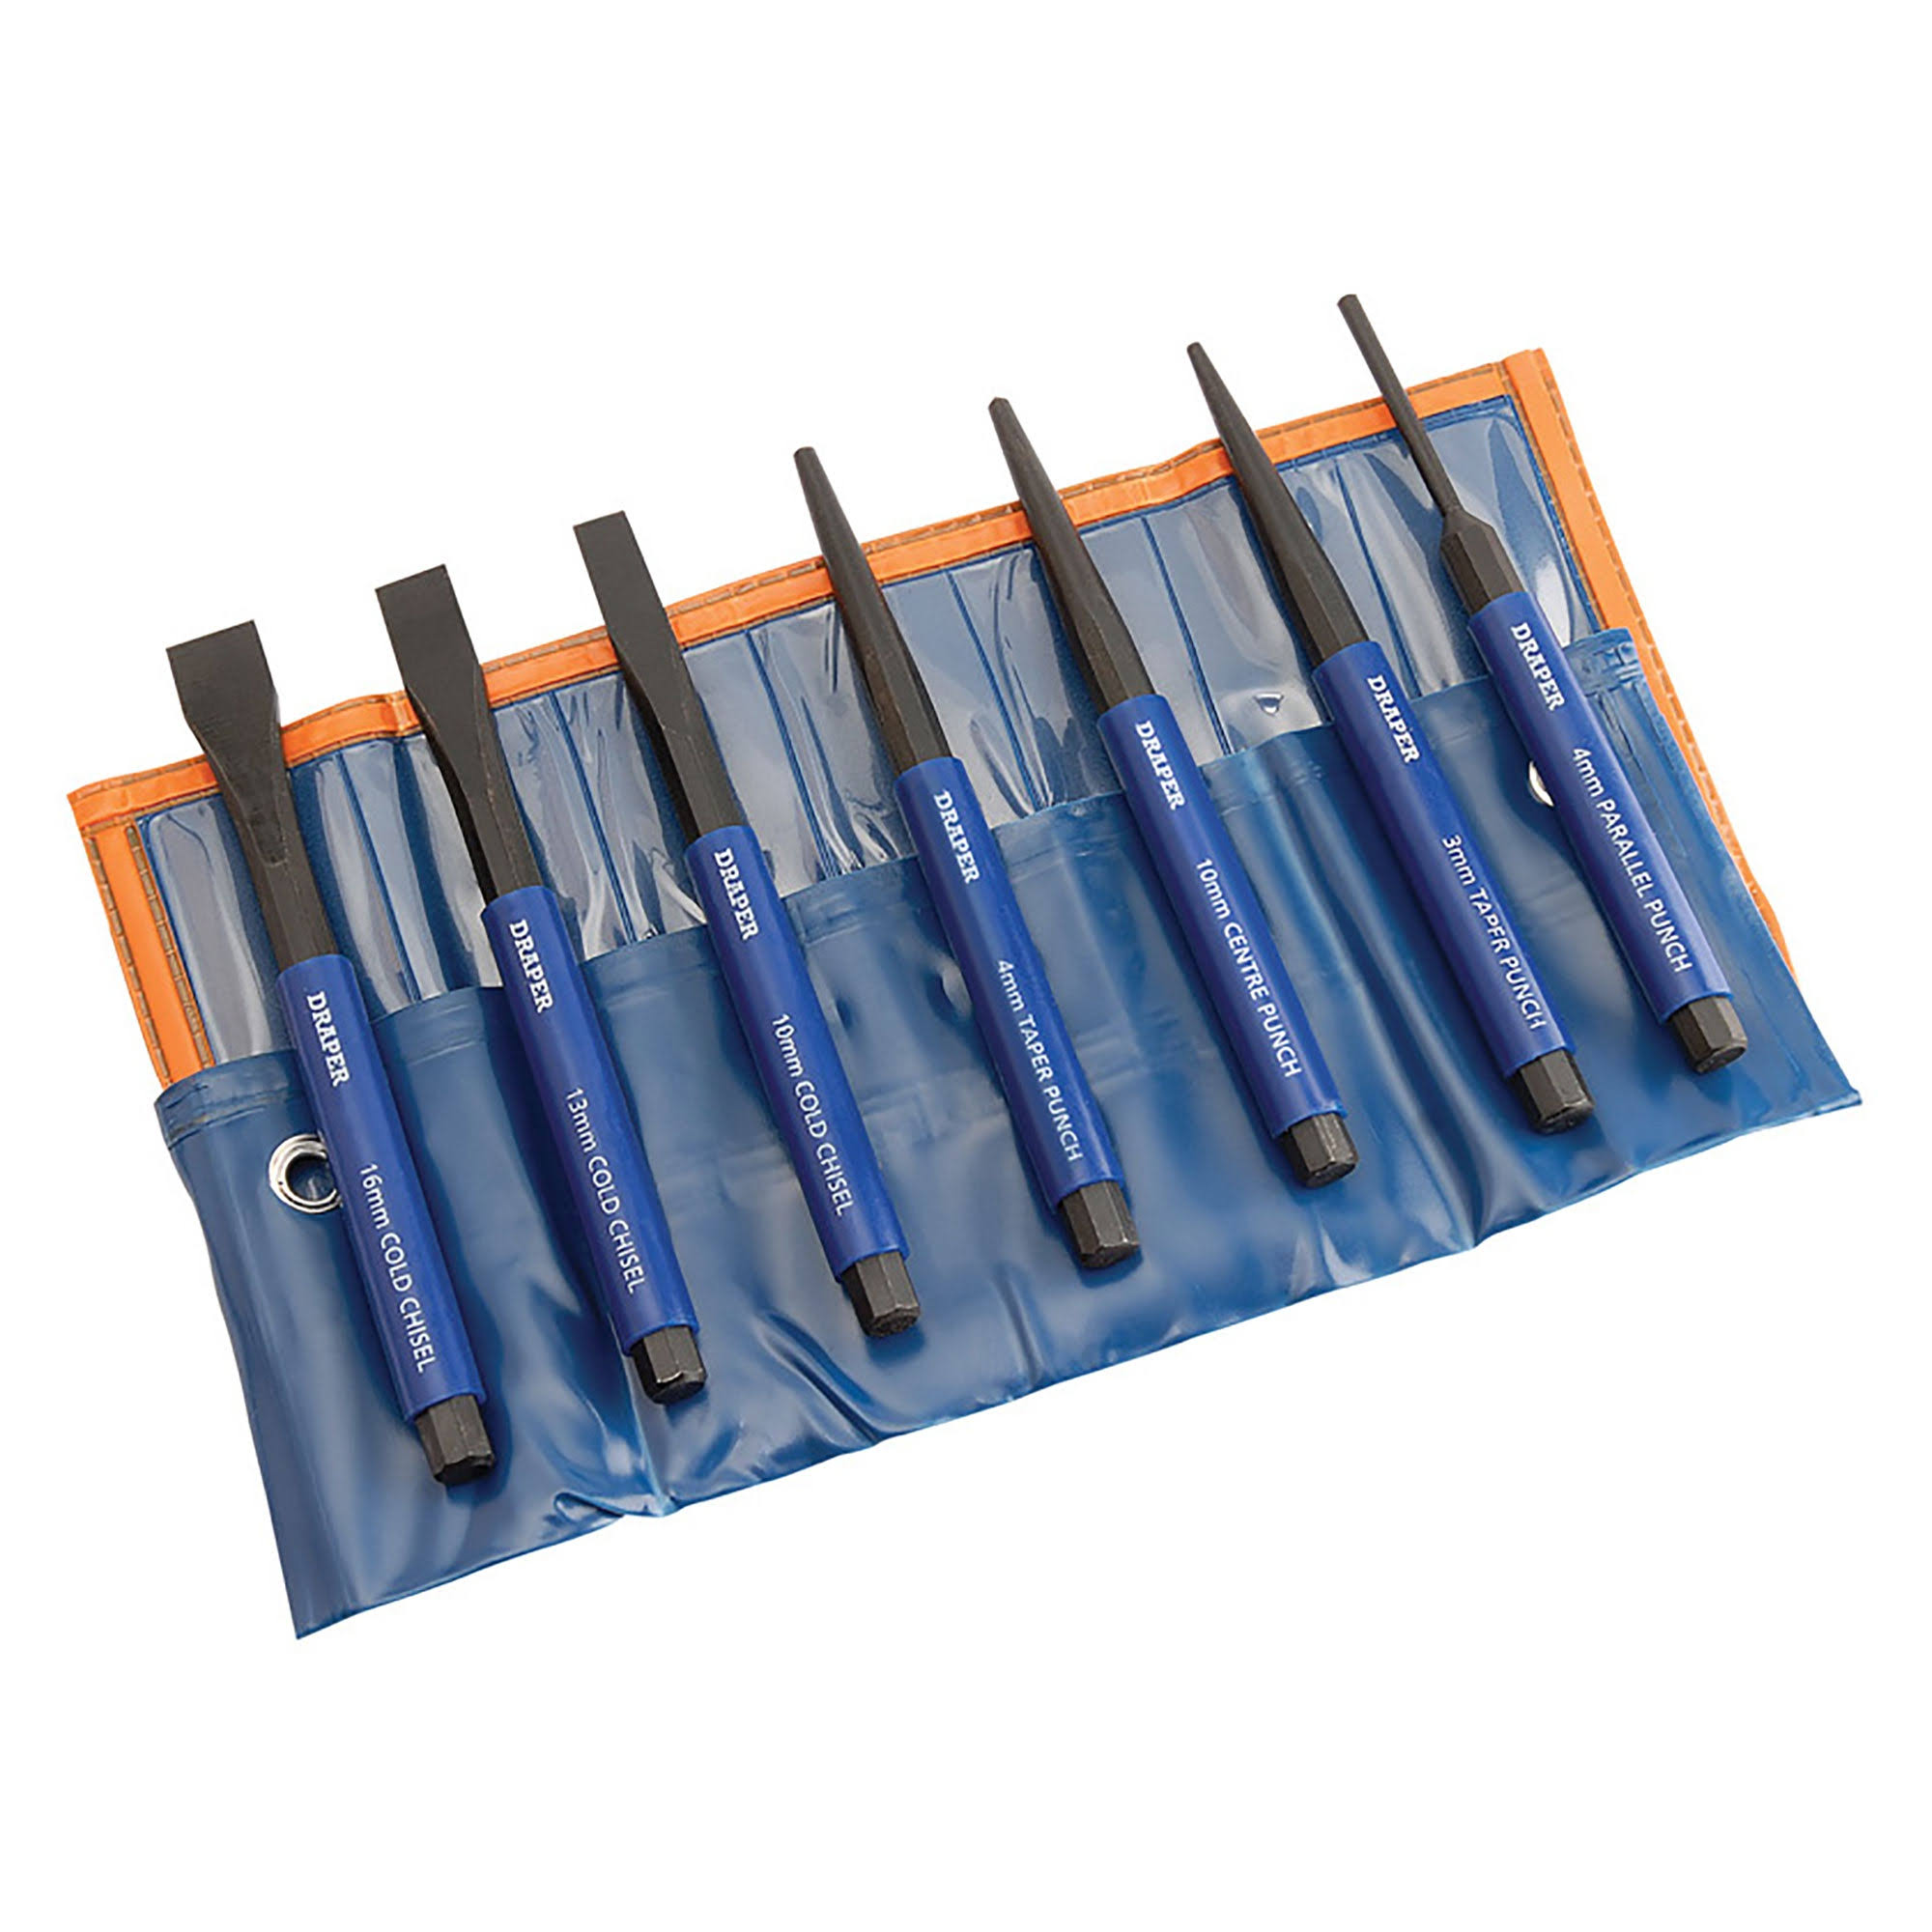 Draper - 23187 Chisel and Punch Set (7 Piece)